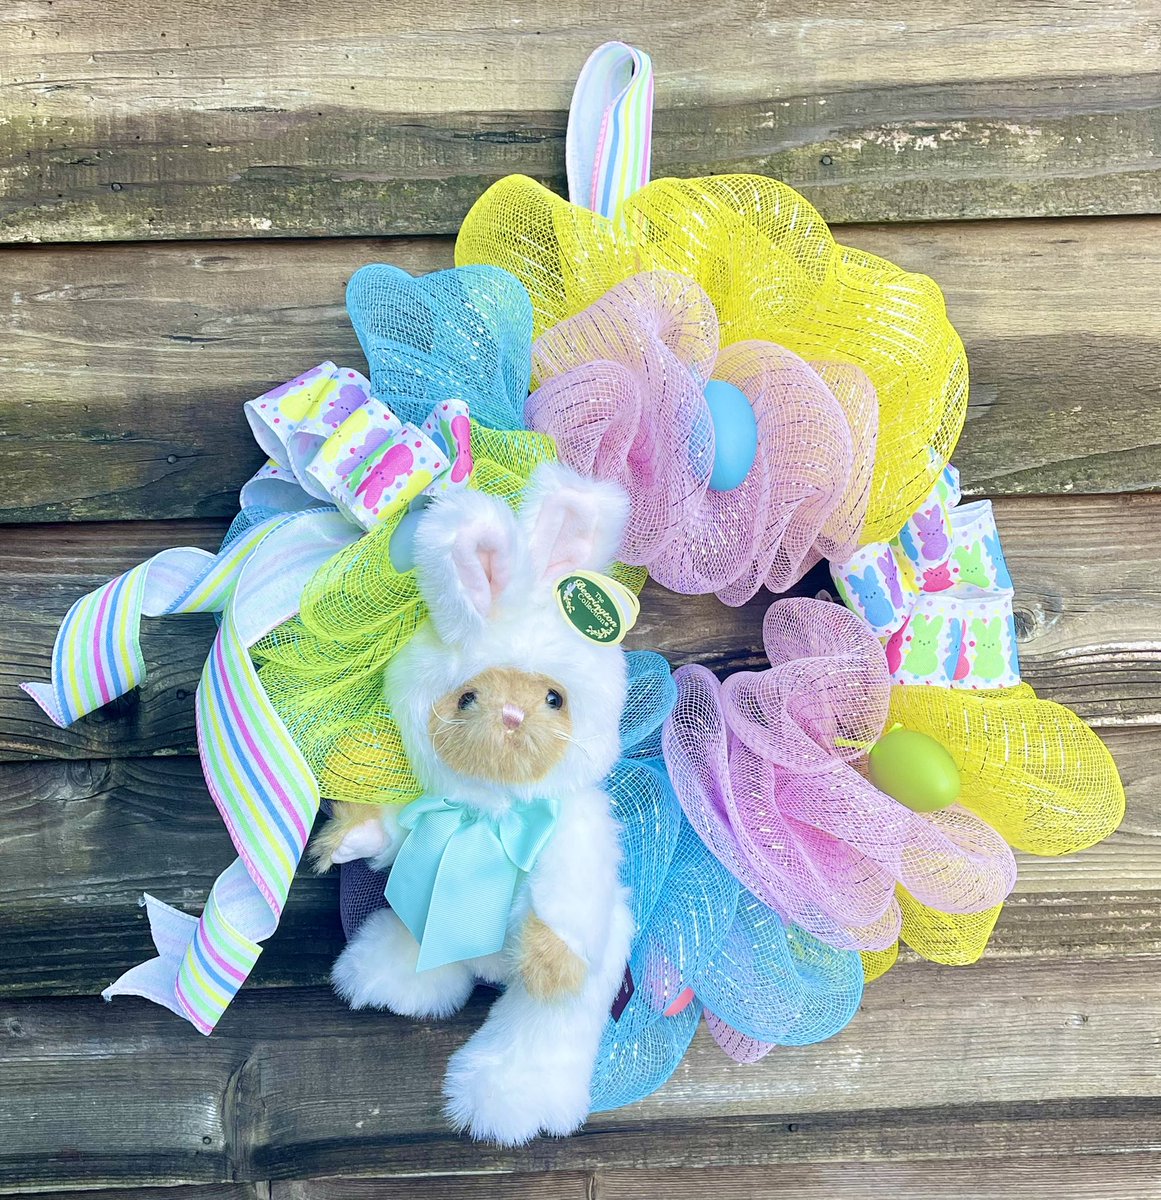 Looks like the Easter bunny is ready to hop off this wreath after hiding his eggs! Come check it out at Sunflowerdayzkraftz.Etsy.com  #etsy #etsyfinds #etayseller #etsyhome #etsyhomedecor #etsybusiness #etsysmallbusiness #easterbunnywreath #bunny #bunnywreath #easterhomedecor